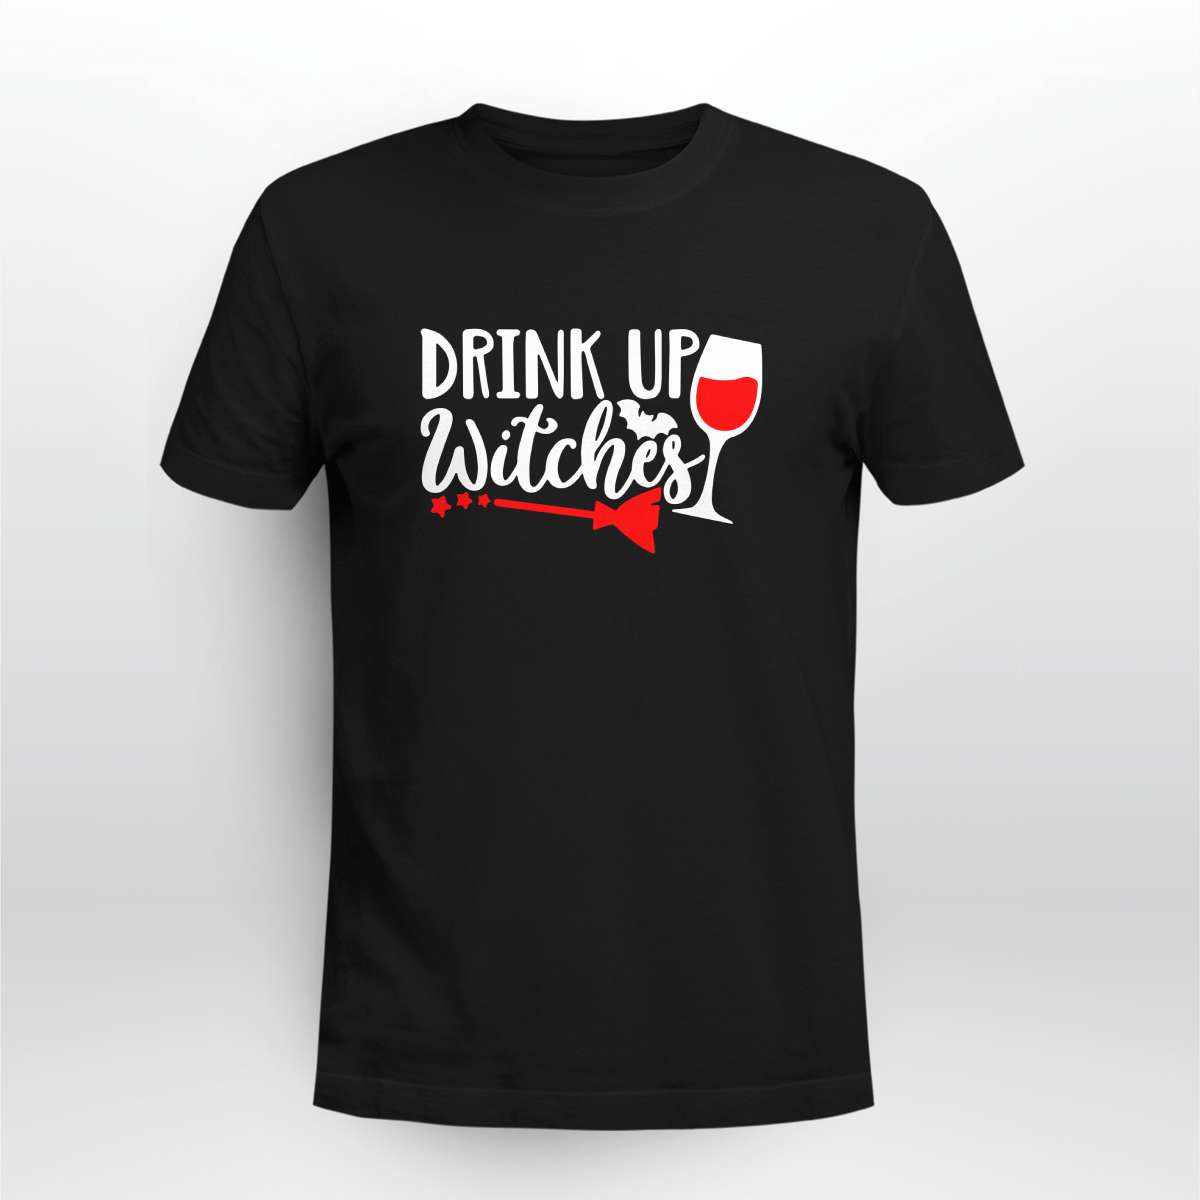 Love Wine - Drink up witches